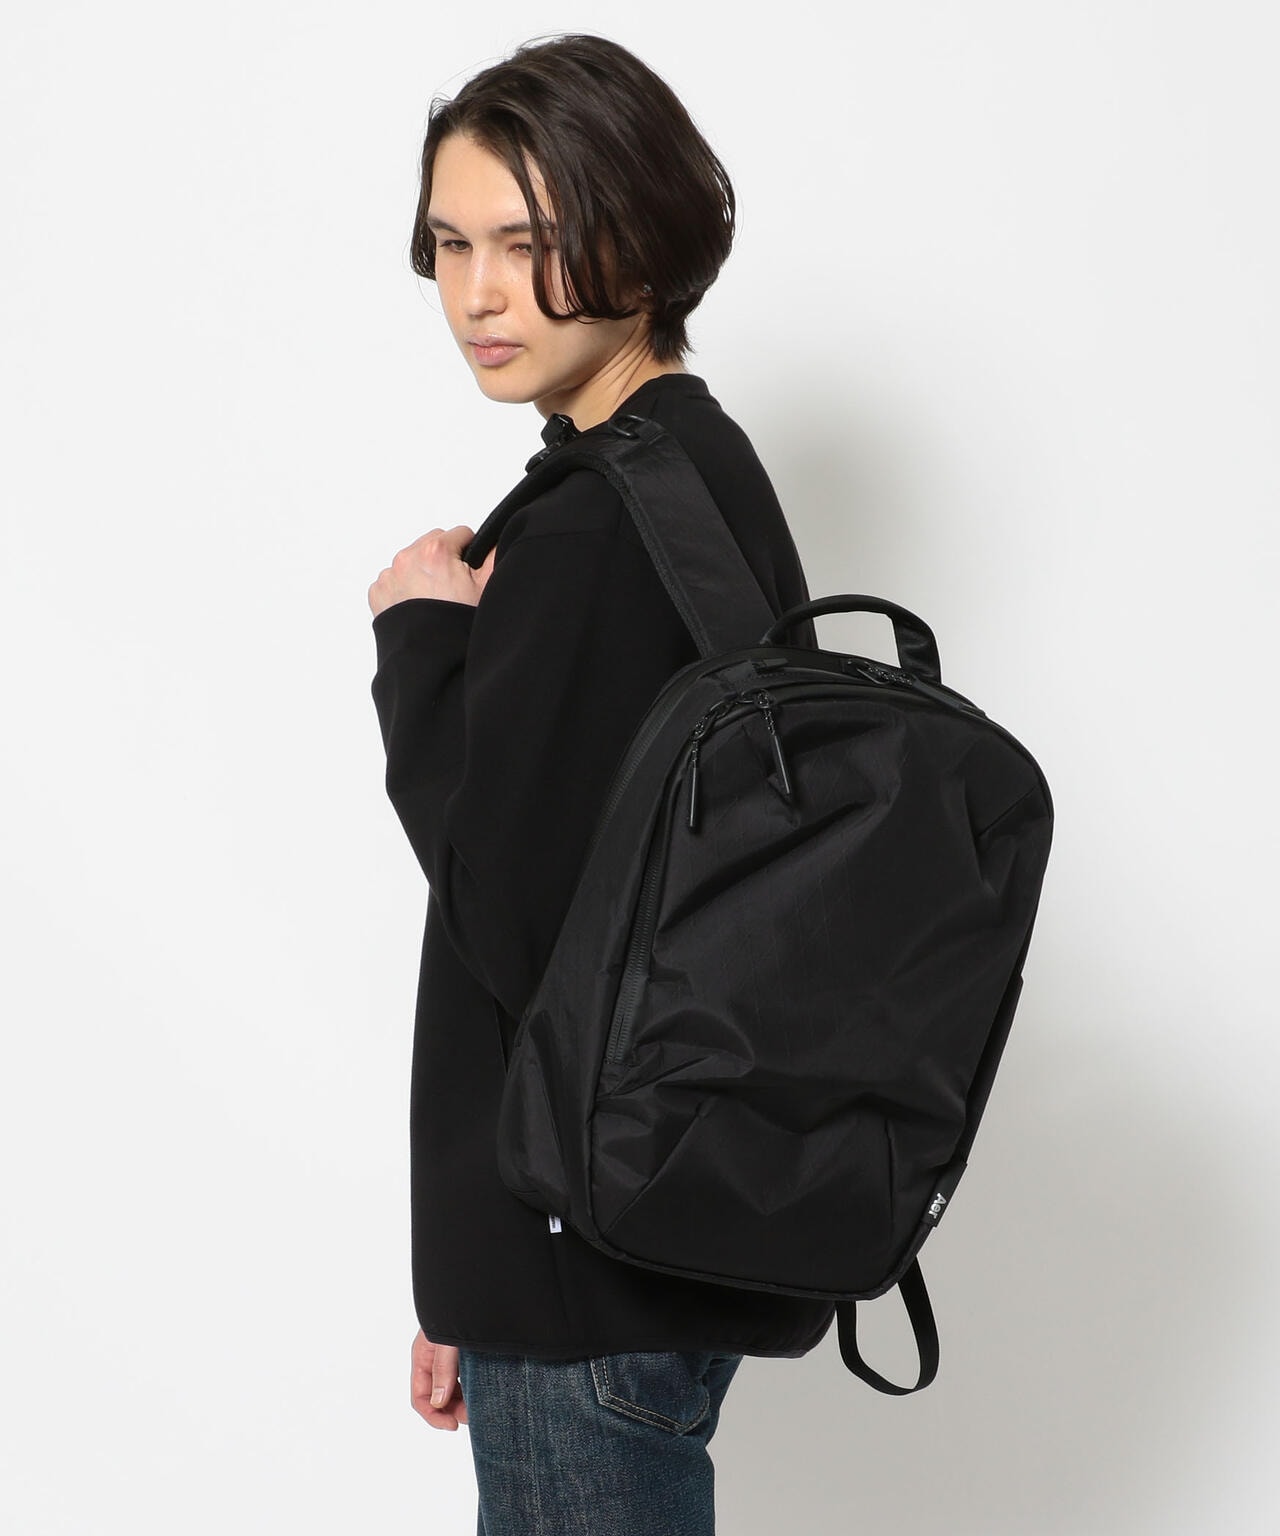 AER Day Pack 2 X-PAC素材